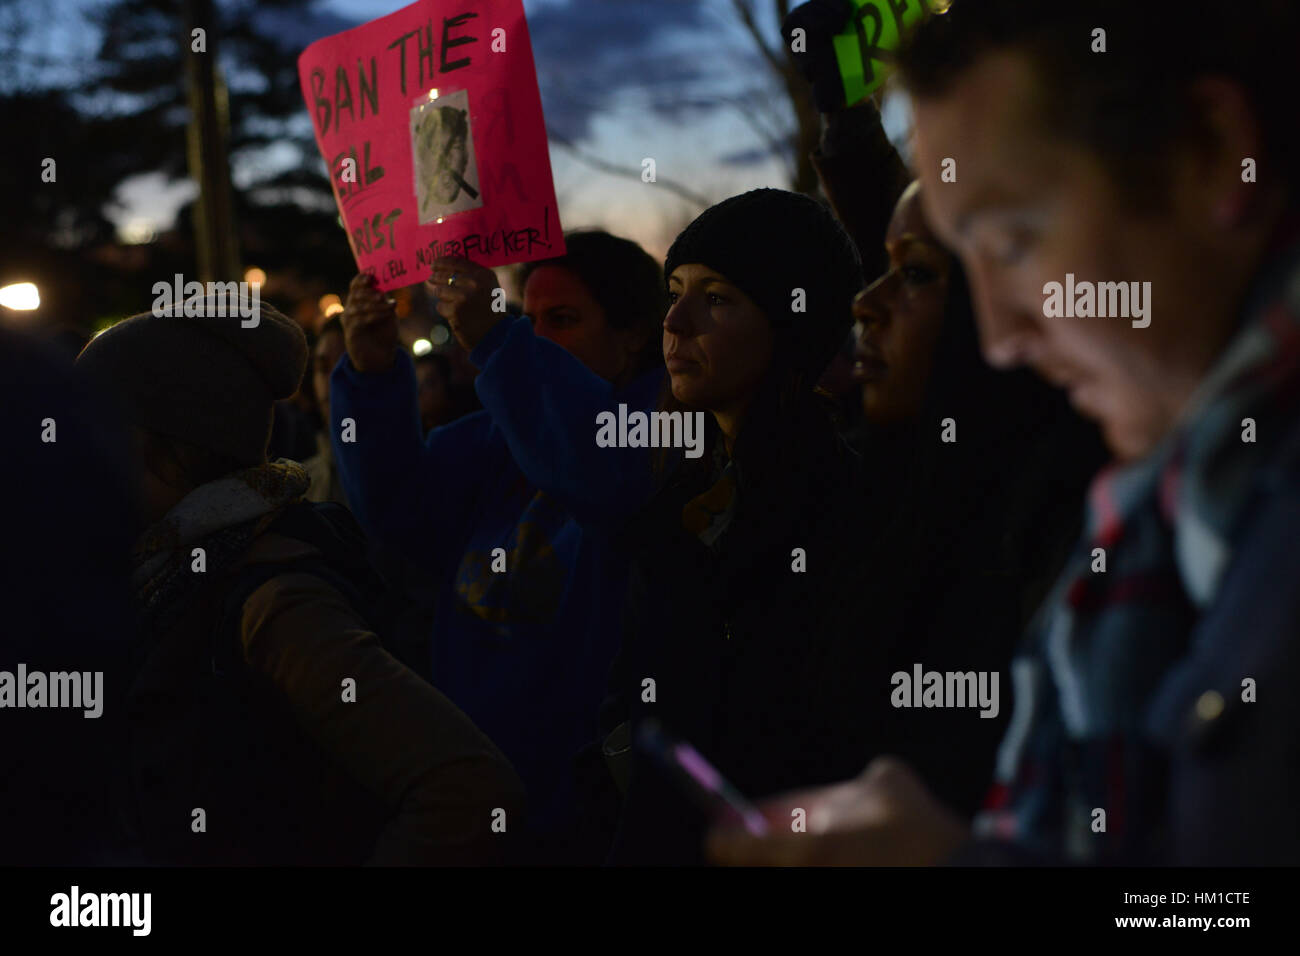 Washington, USA. 30th Jan, 2017. Hundreds gather in front of the U.S. Supreme Court in Washington D.C. to protest President Trump's travel ban targeting refugees and citizens of seven majority Muslim nations. Congressional Democrats attended the demonstration, a continuation of protests accross the nation that began after Trump signed the executive order. Credit: Miguel Juarez Lugo/ZUMA Wire/Alamy Live News Stock Photo